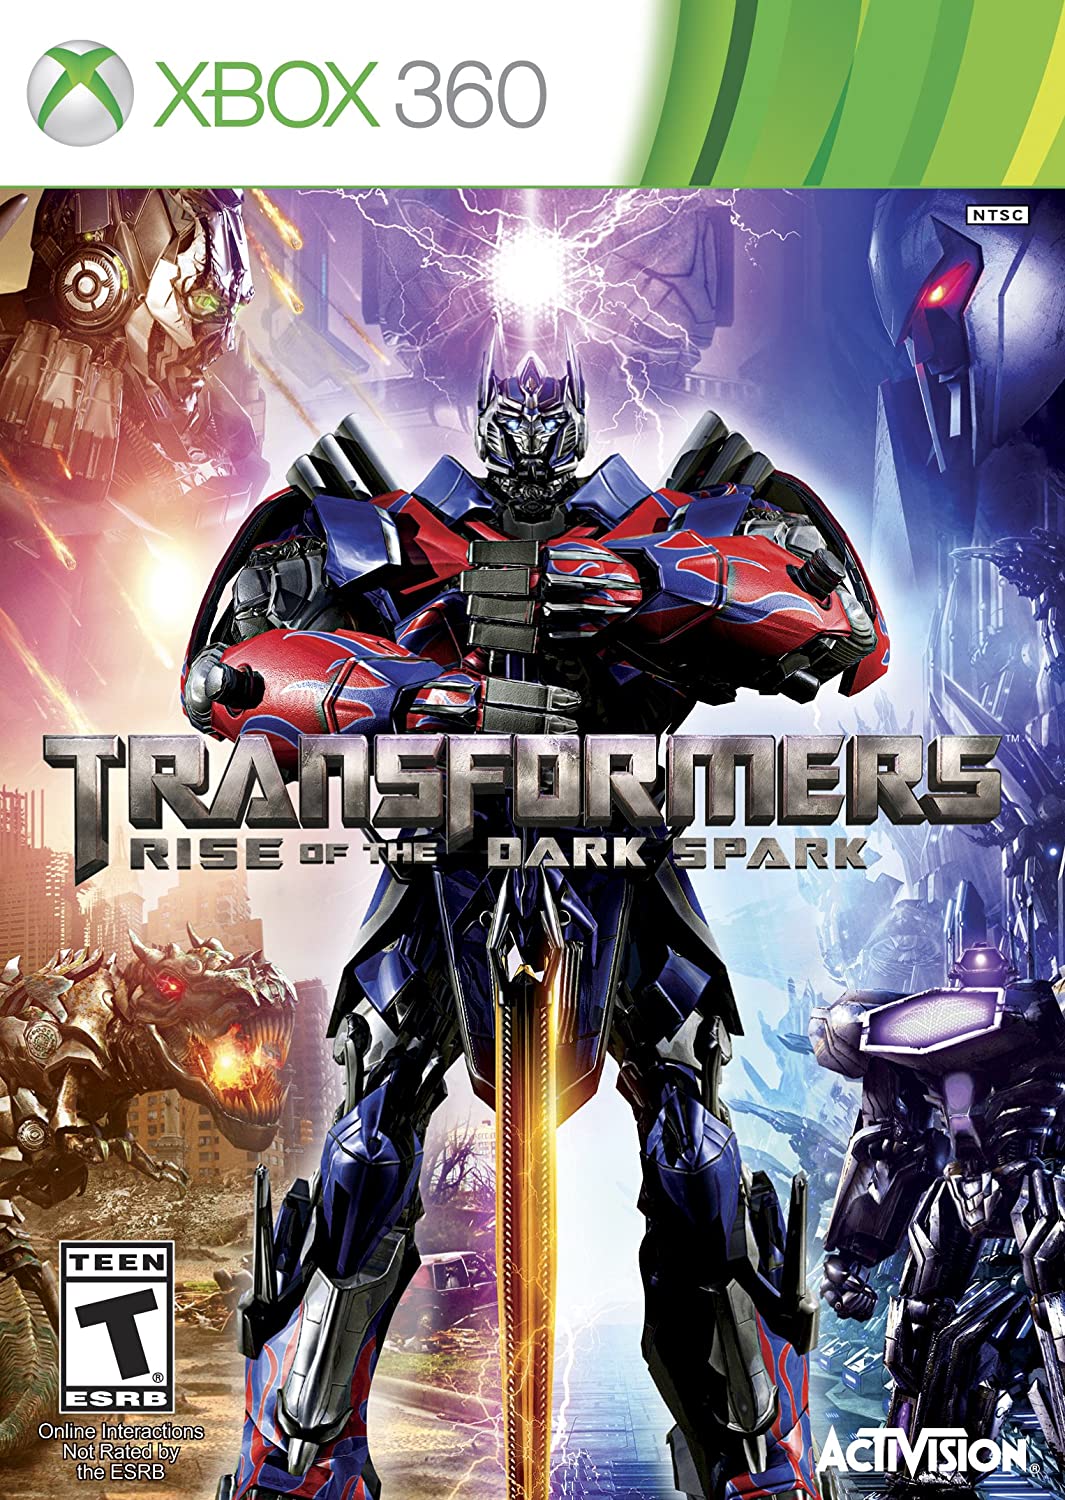 Transformers: Rise of the Dark Spark player count stats